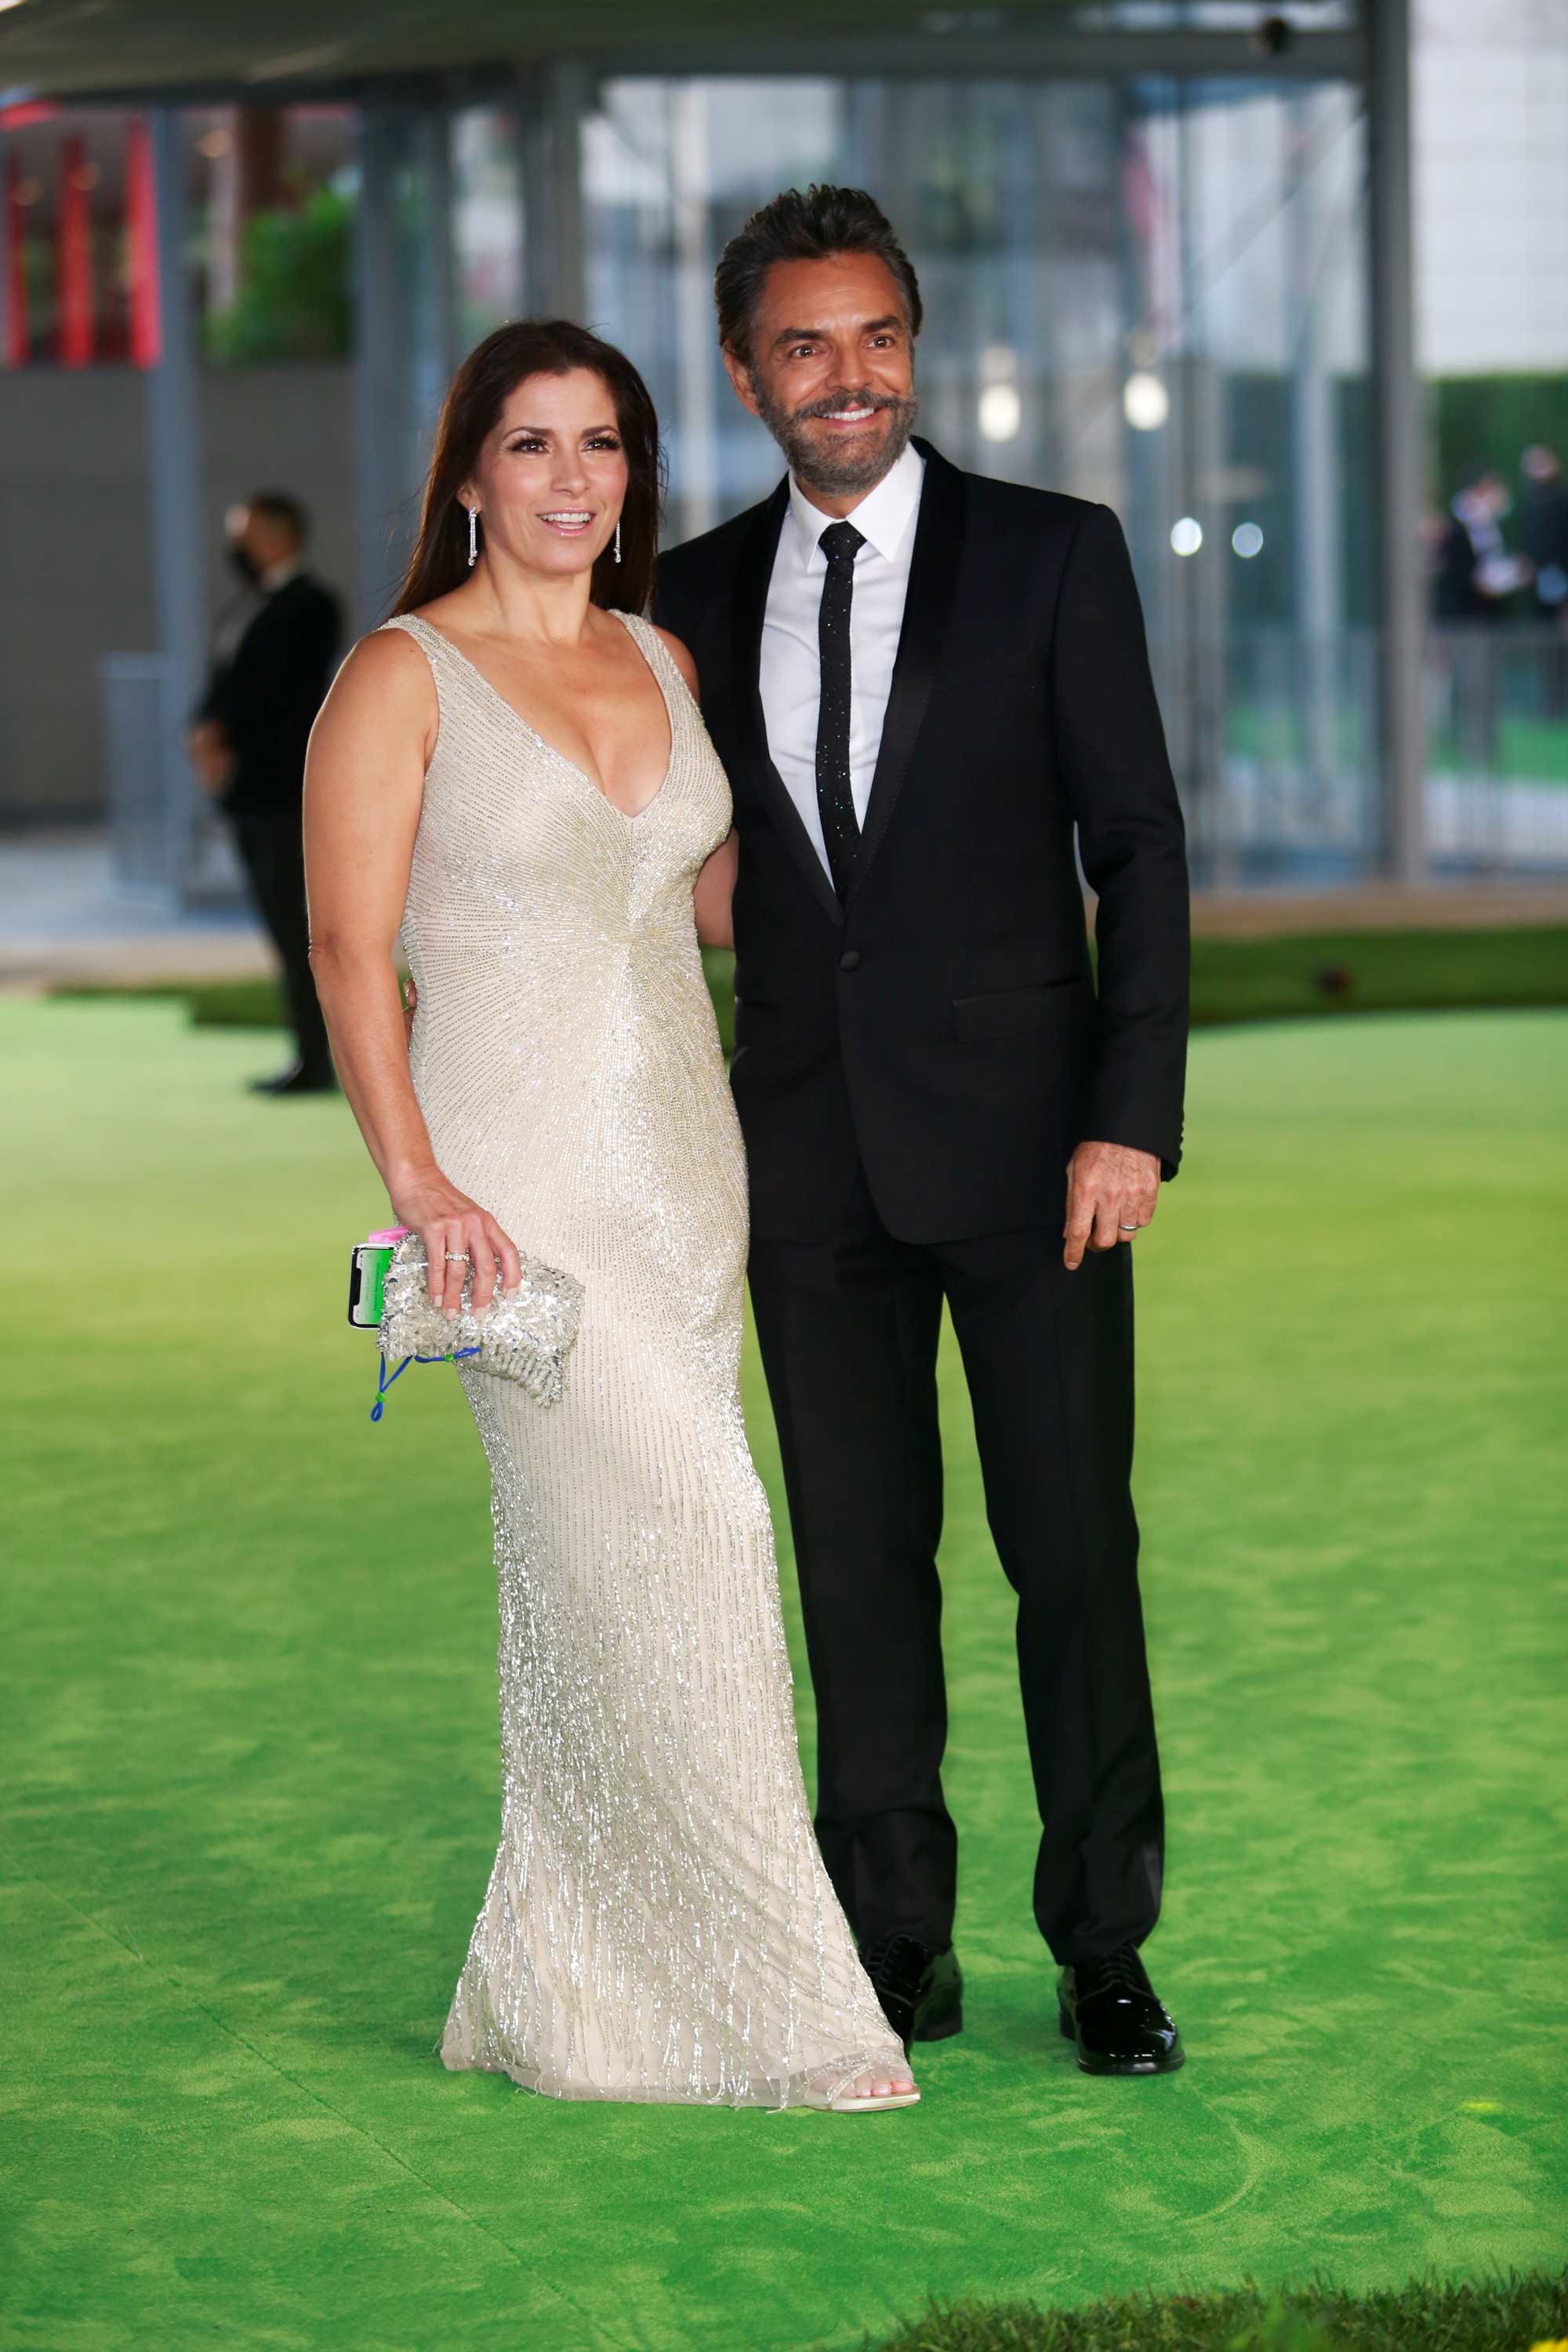 Mexican actor Eugenio Derbez and his wife Mexican actress Alessandra Rosaldo attend the Academy Museum of Motion Pictures gala in Los Angeles, California, U.S., September 25, 2021. Picture taken September 25, 2021. REUTERS/Ringo Chiu